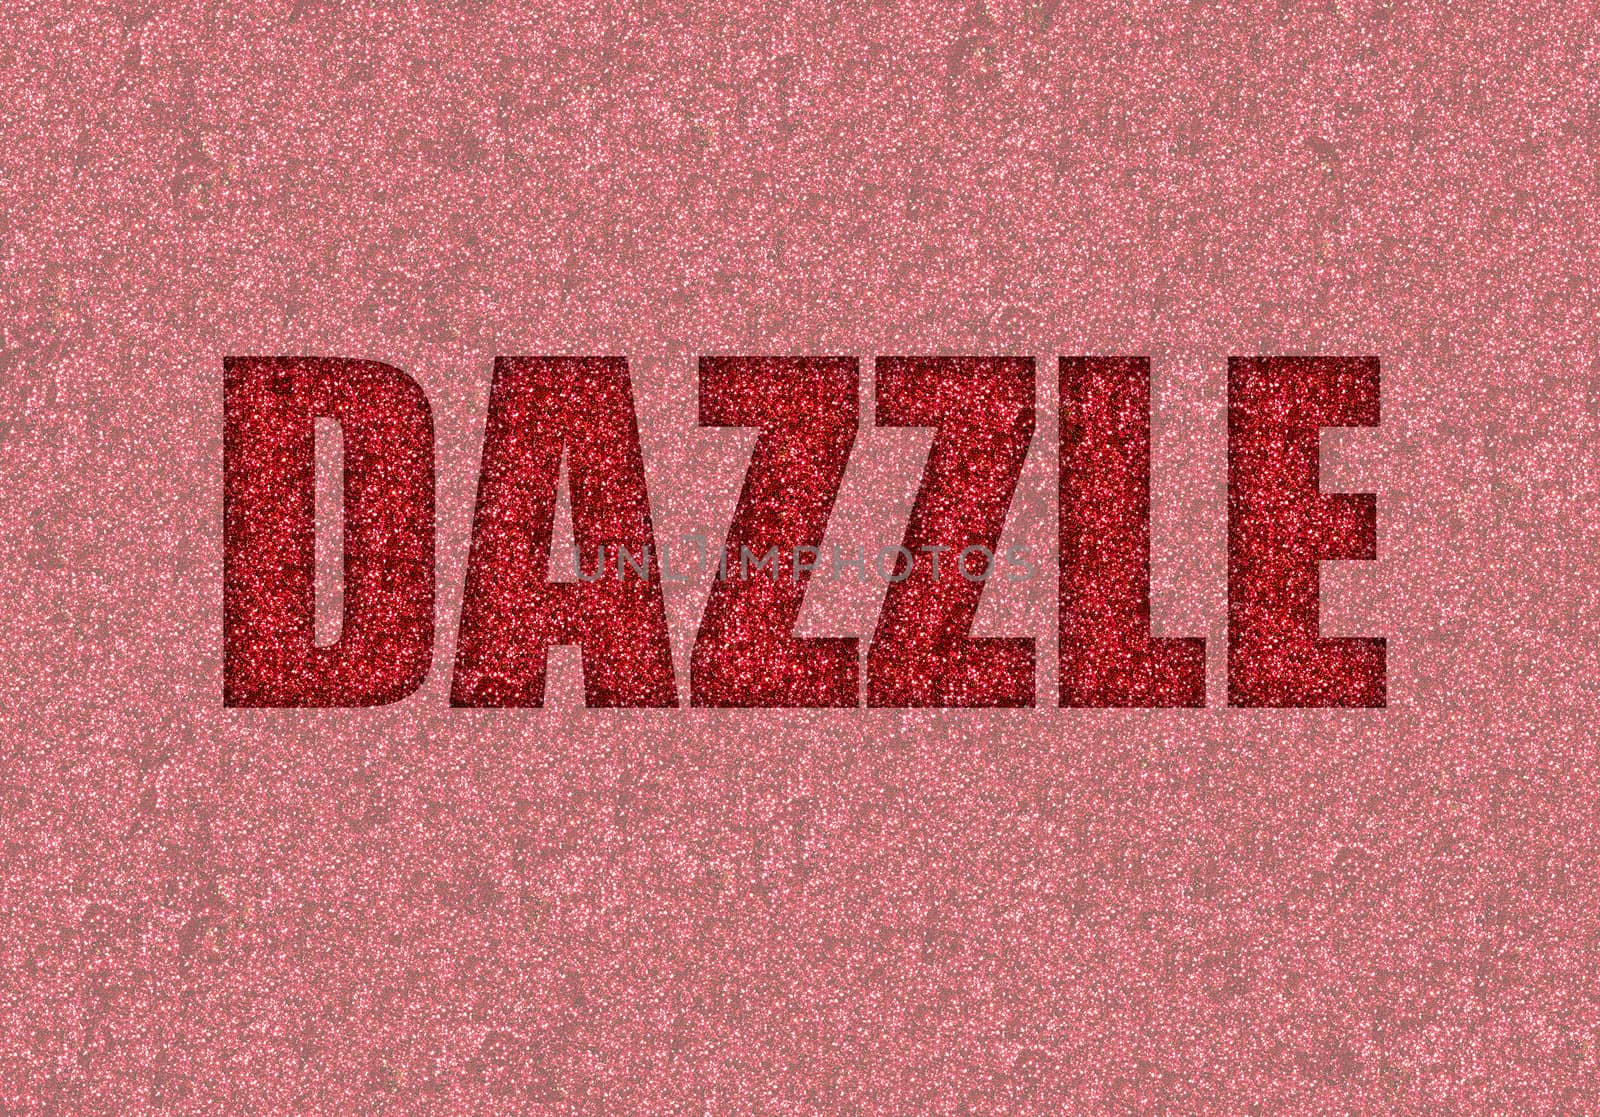 dazzle with glitter by ftlaudgirl